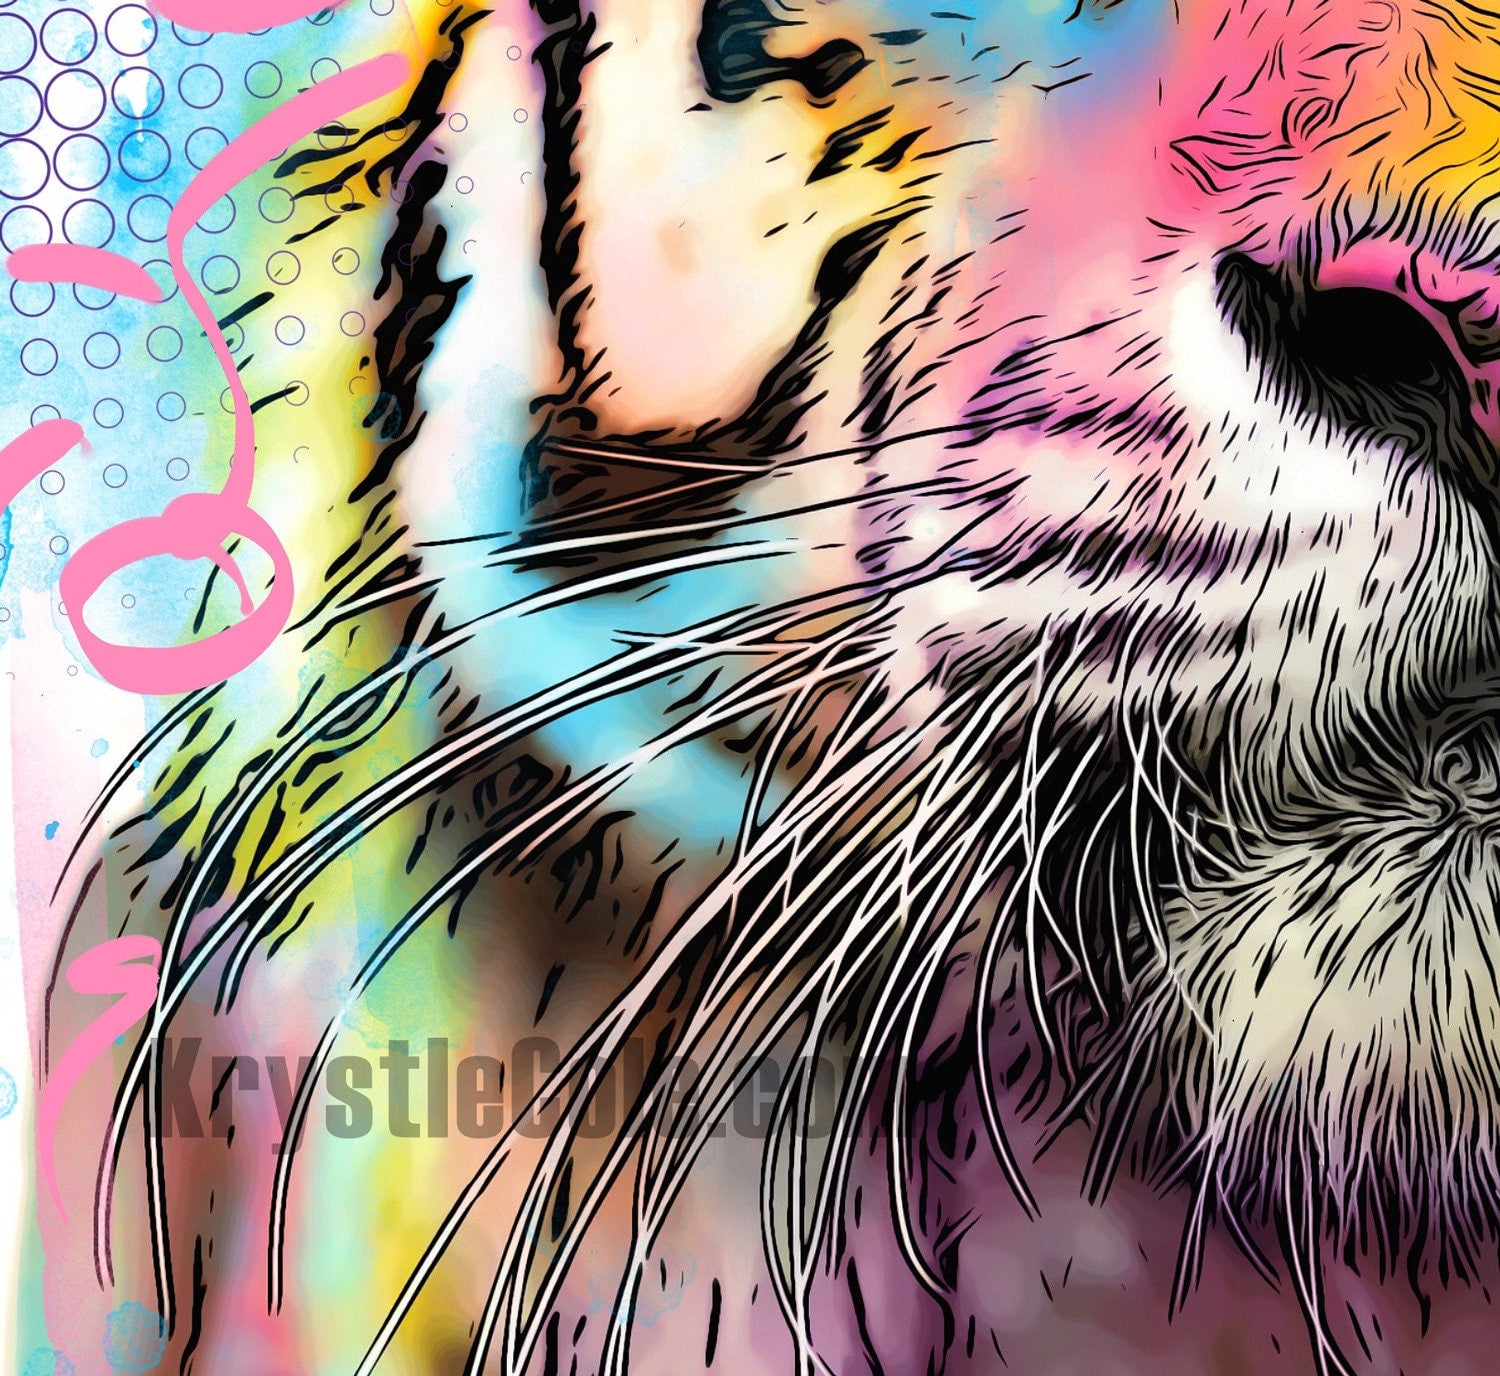 Tiger Art Print on CANVAS or PAPER - Tiger Wall Art. Tiger Painting. Original Artwork by Krystle Cole *Each Print Hand Signed*